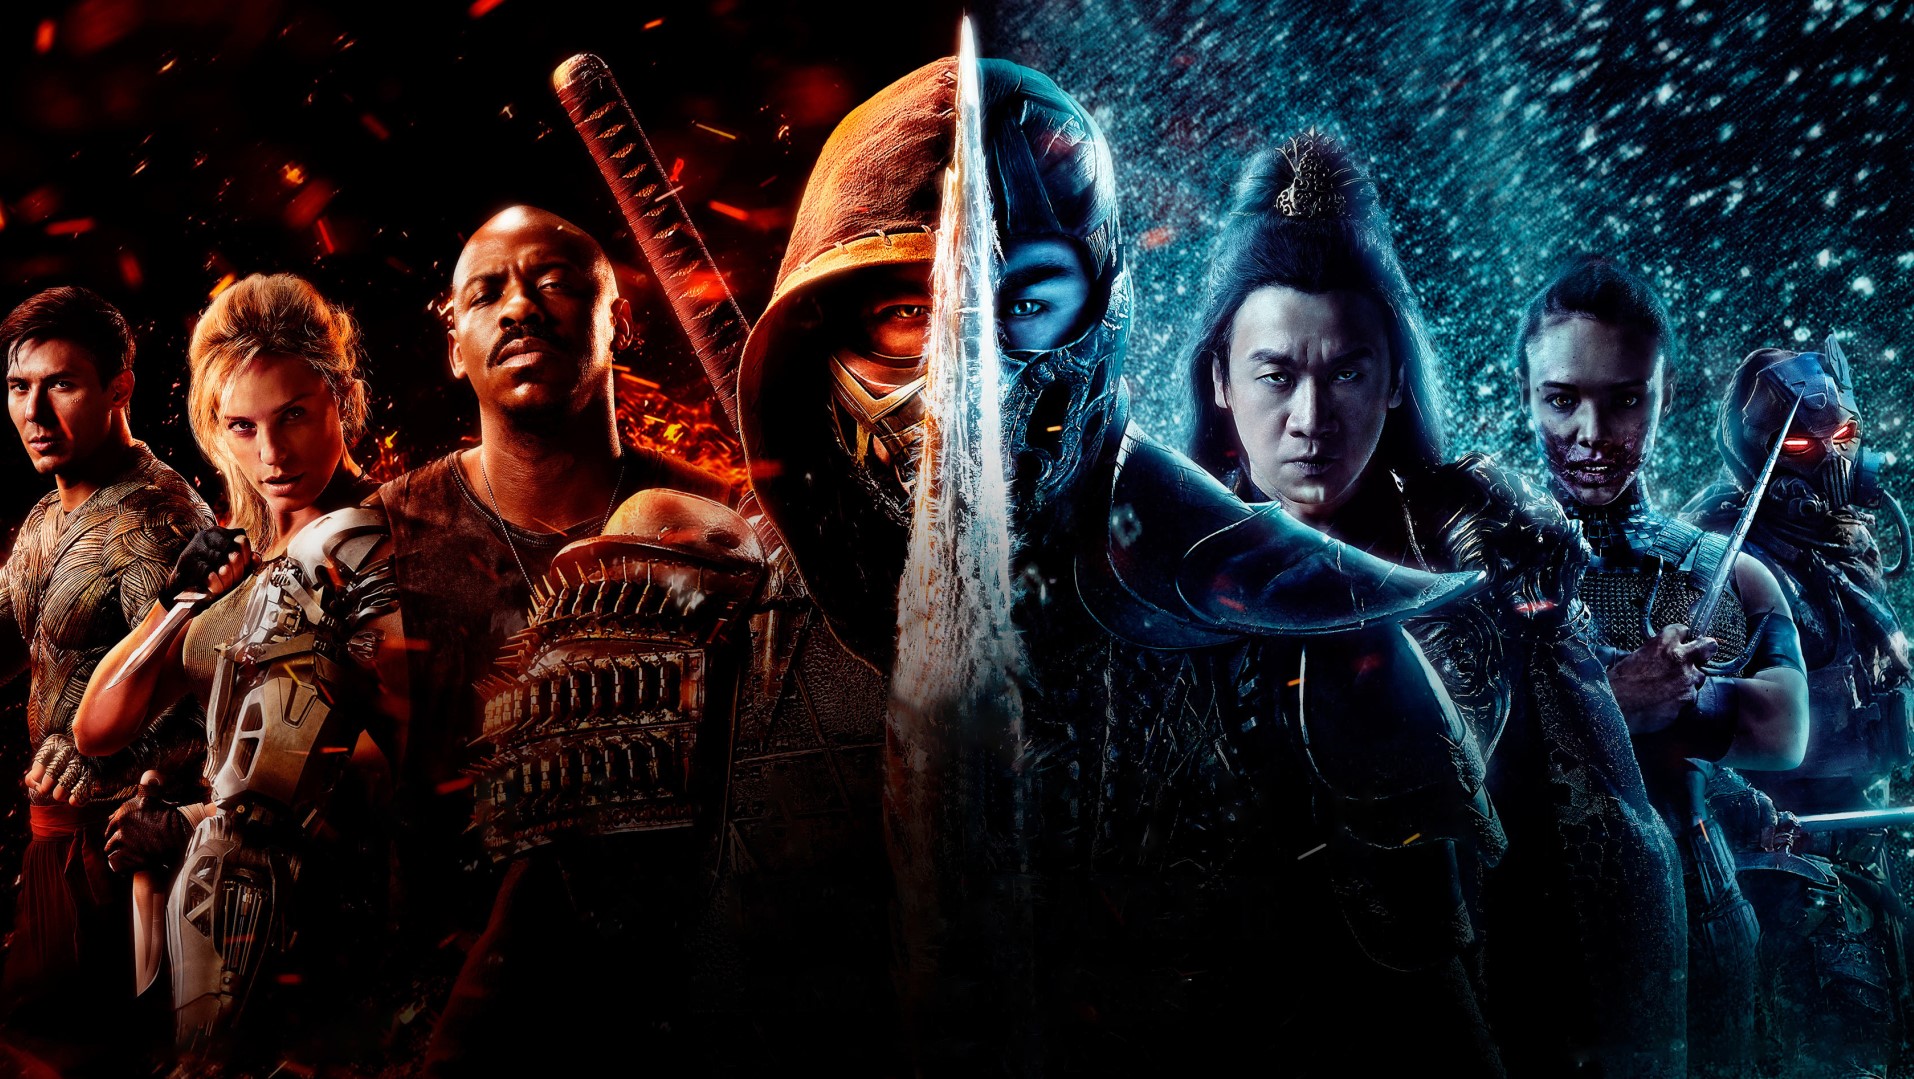 The characters of Mortal Kombat (2021), from left to right: Cole Young, Sonya Blade, Jax Briggs, Scorpion, Sub-Zero, Shang Tsung, Mileena, and Kabal.